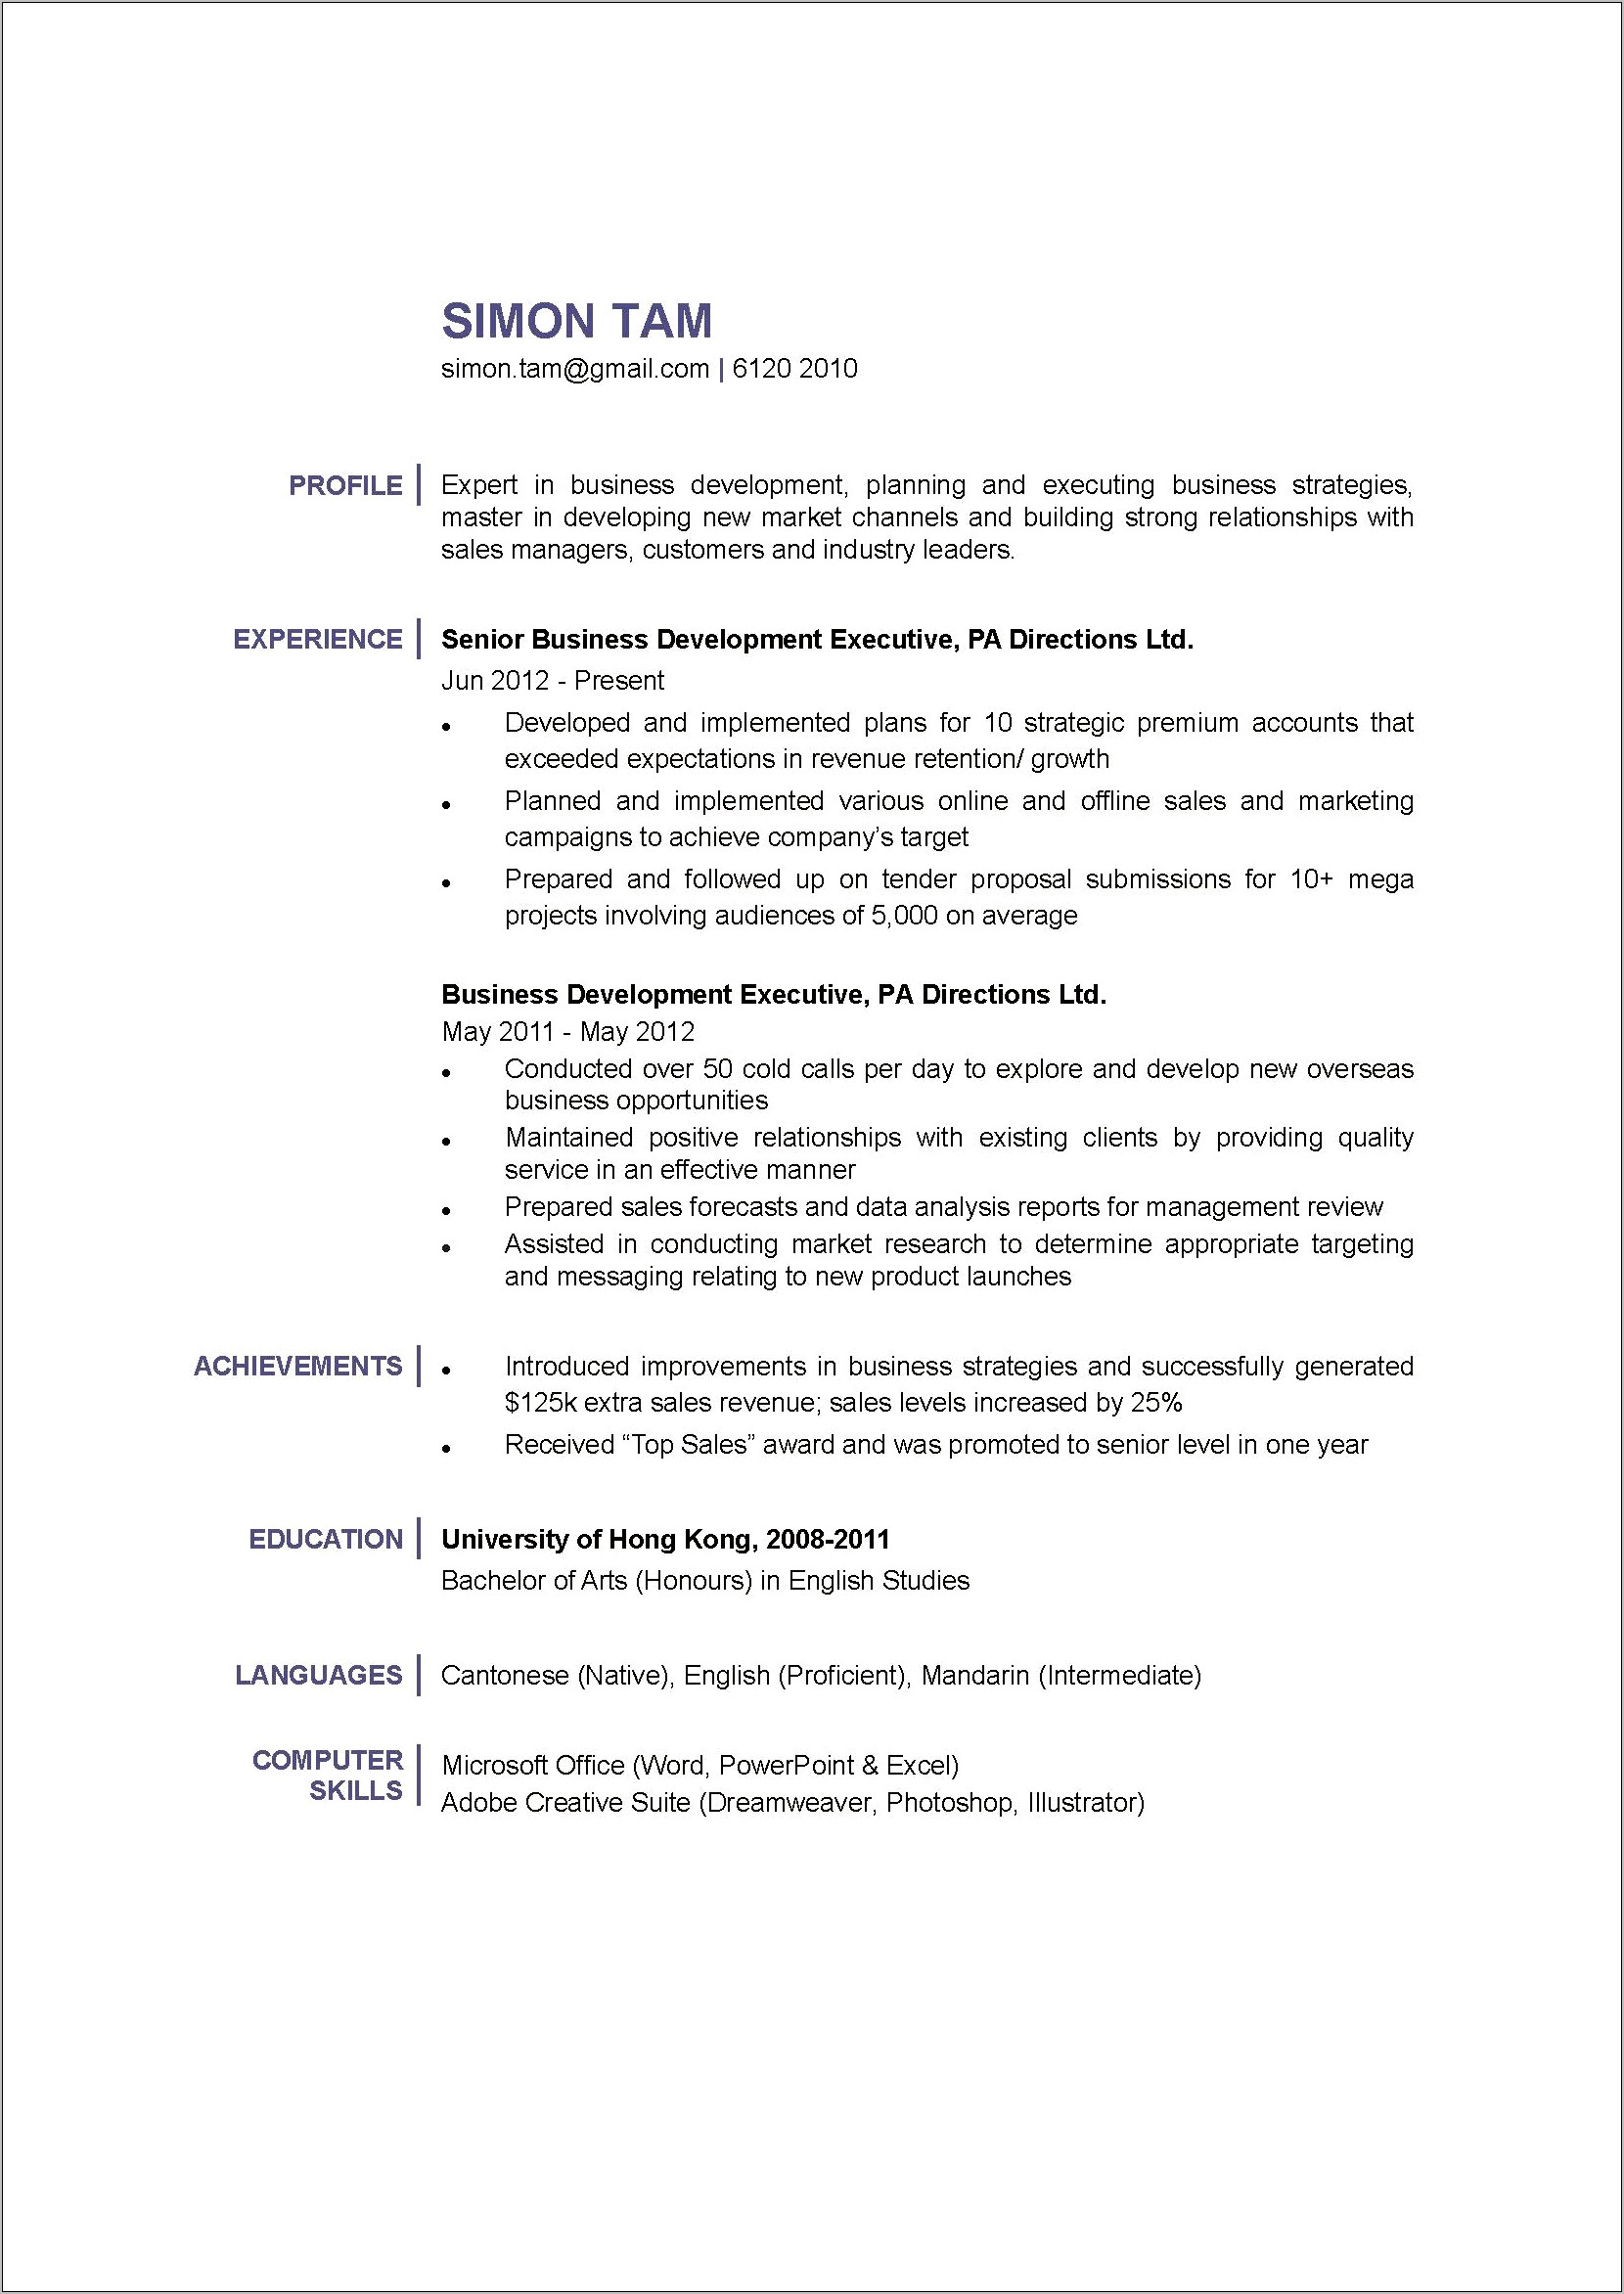 Cold Calling Experience On Resume Sales